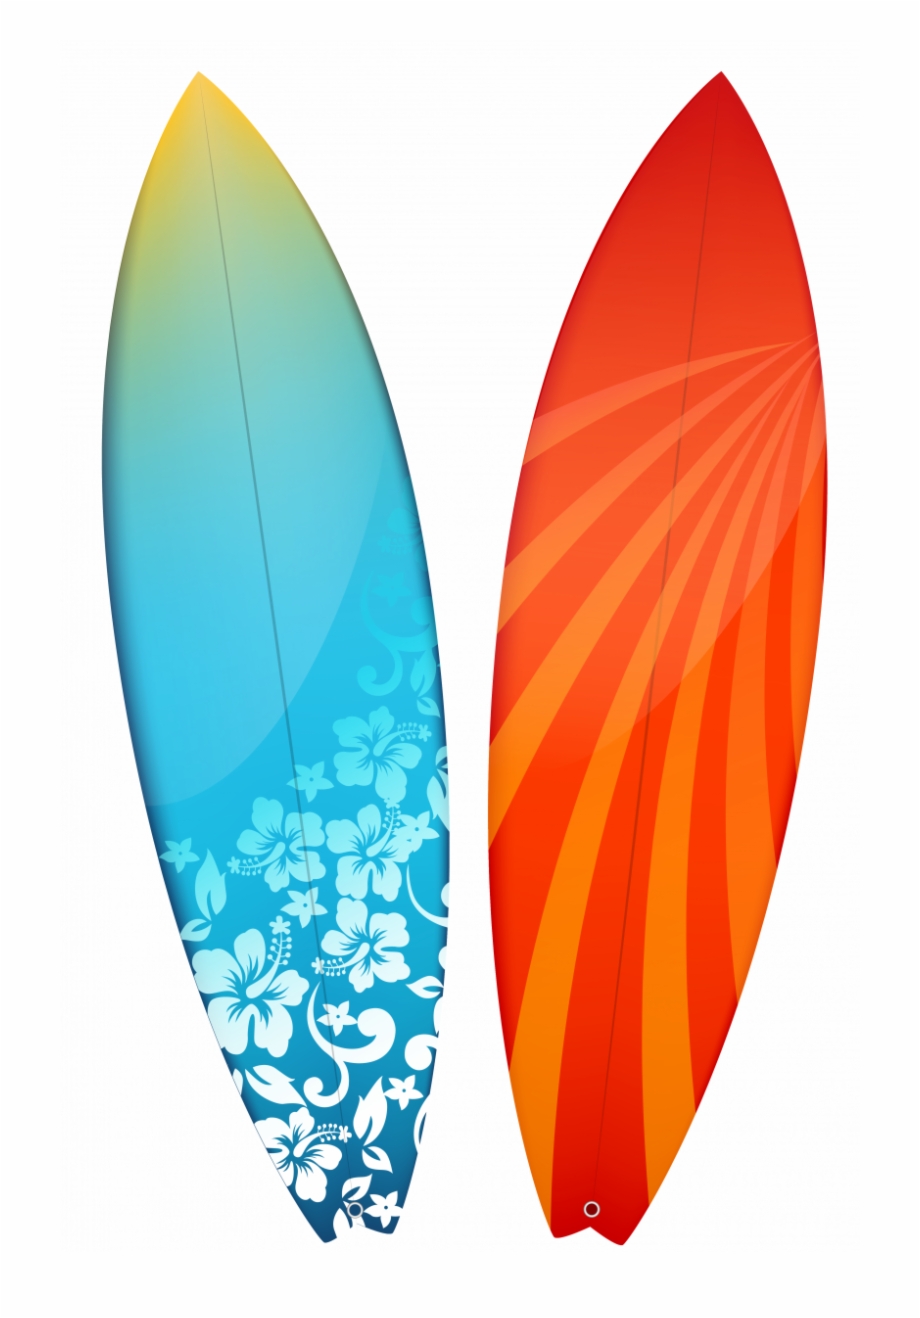 Surfboards Png Clipart Image High Quality Surfboard Clipart